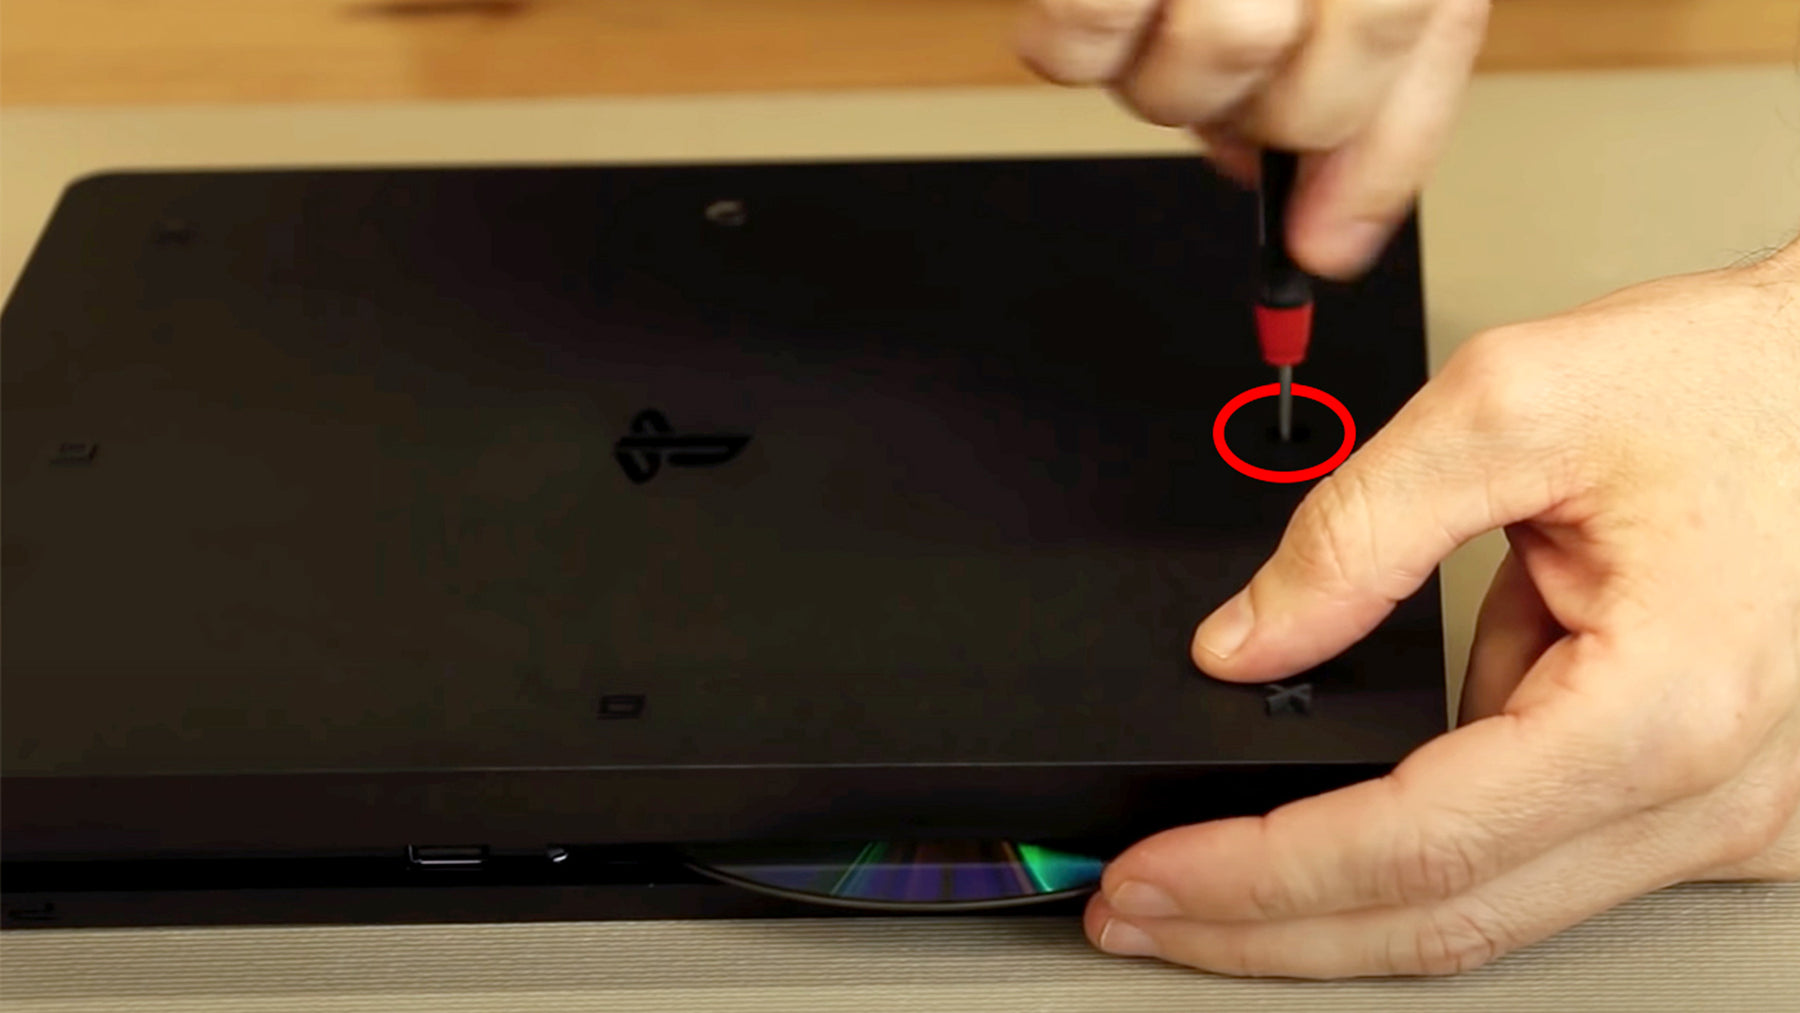 How to Manually Eject a Disc From a PS4